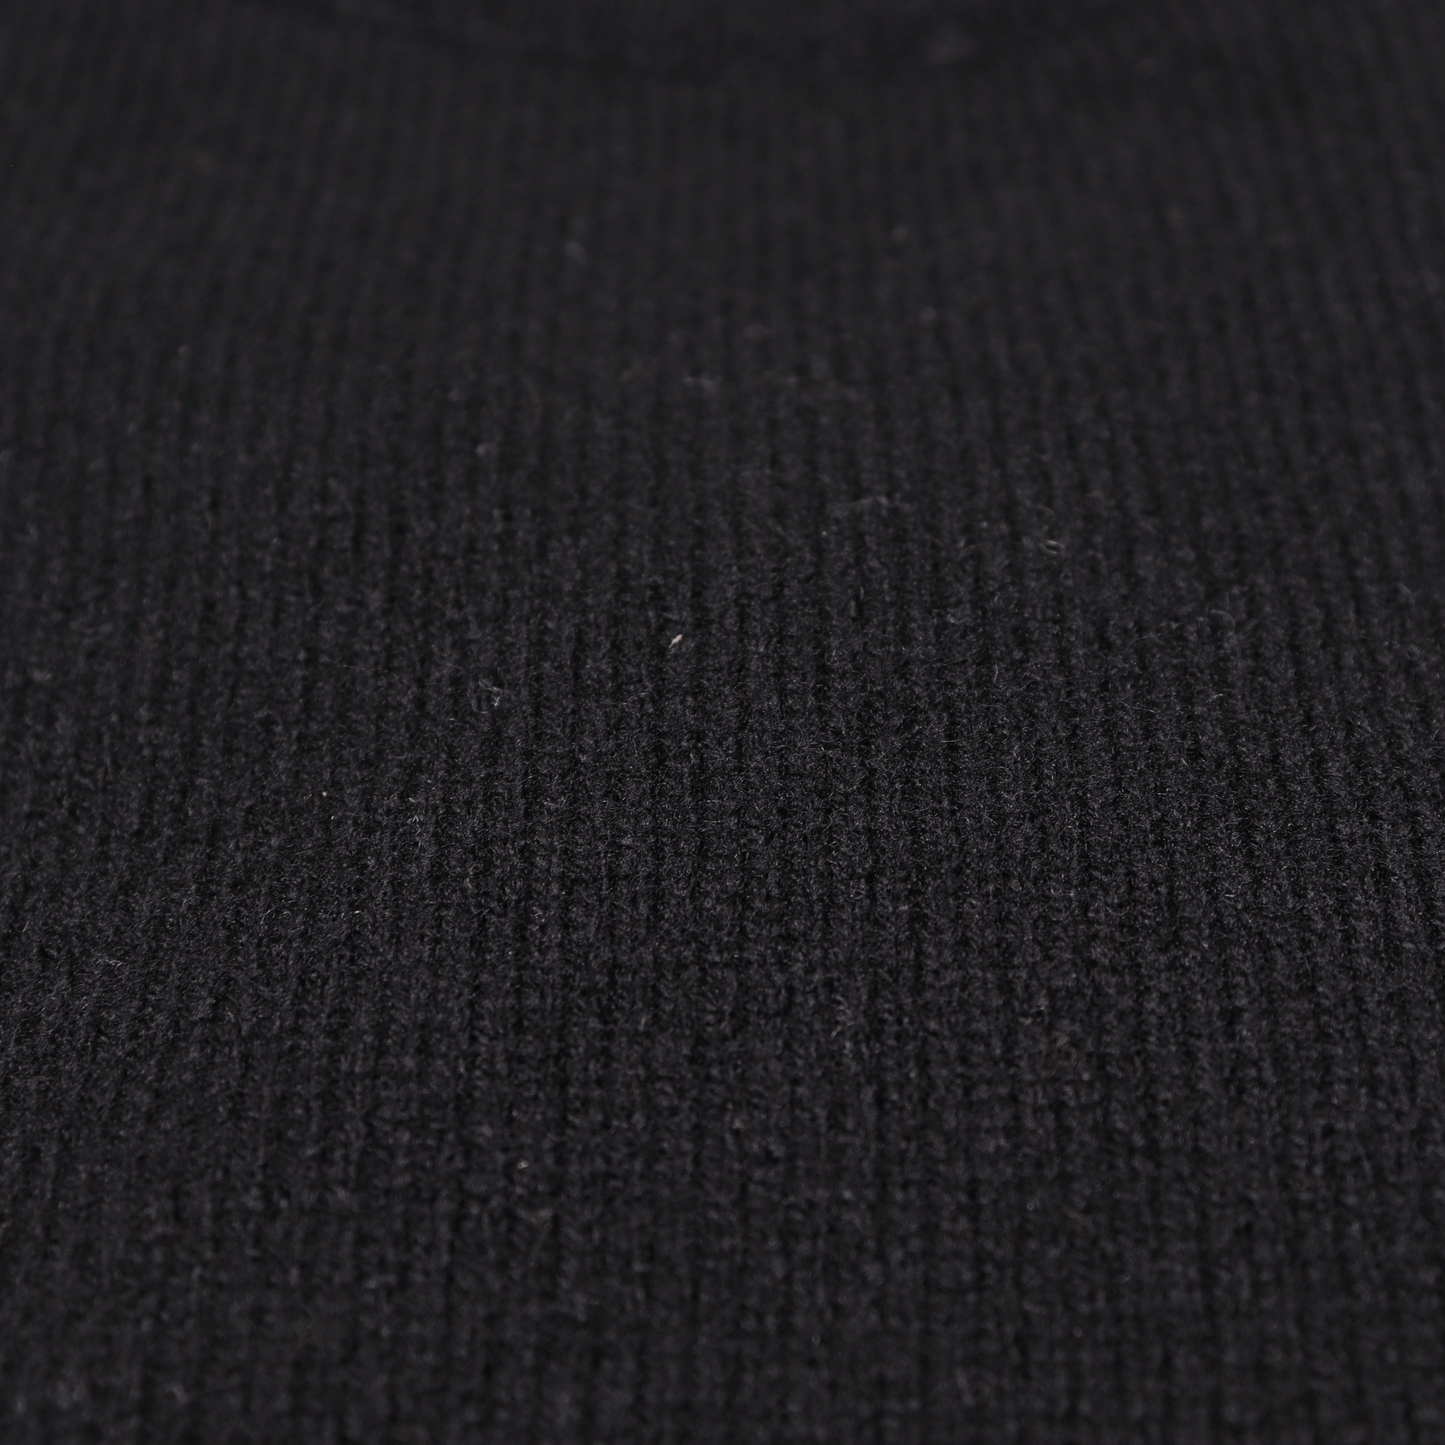 Stay warm and stylish with the Loch Lomond 100% lambswool long-sleeve jersey in Black (3696). Made from premium lambswool, this jersey offers both comfort and durability. Perfect for chilly days and evenings, it's a versatile addition to any wardrobe. Shop in-store at 337 Monty Naicker Street, Durban or online at www.omarstailors.com